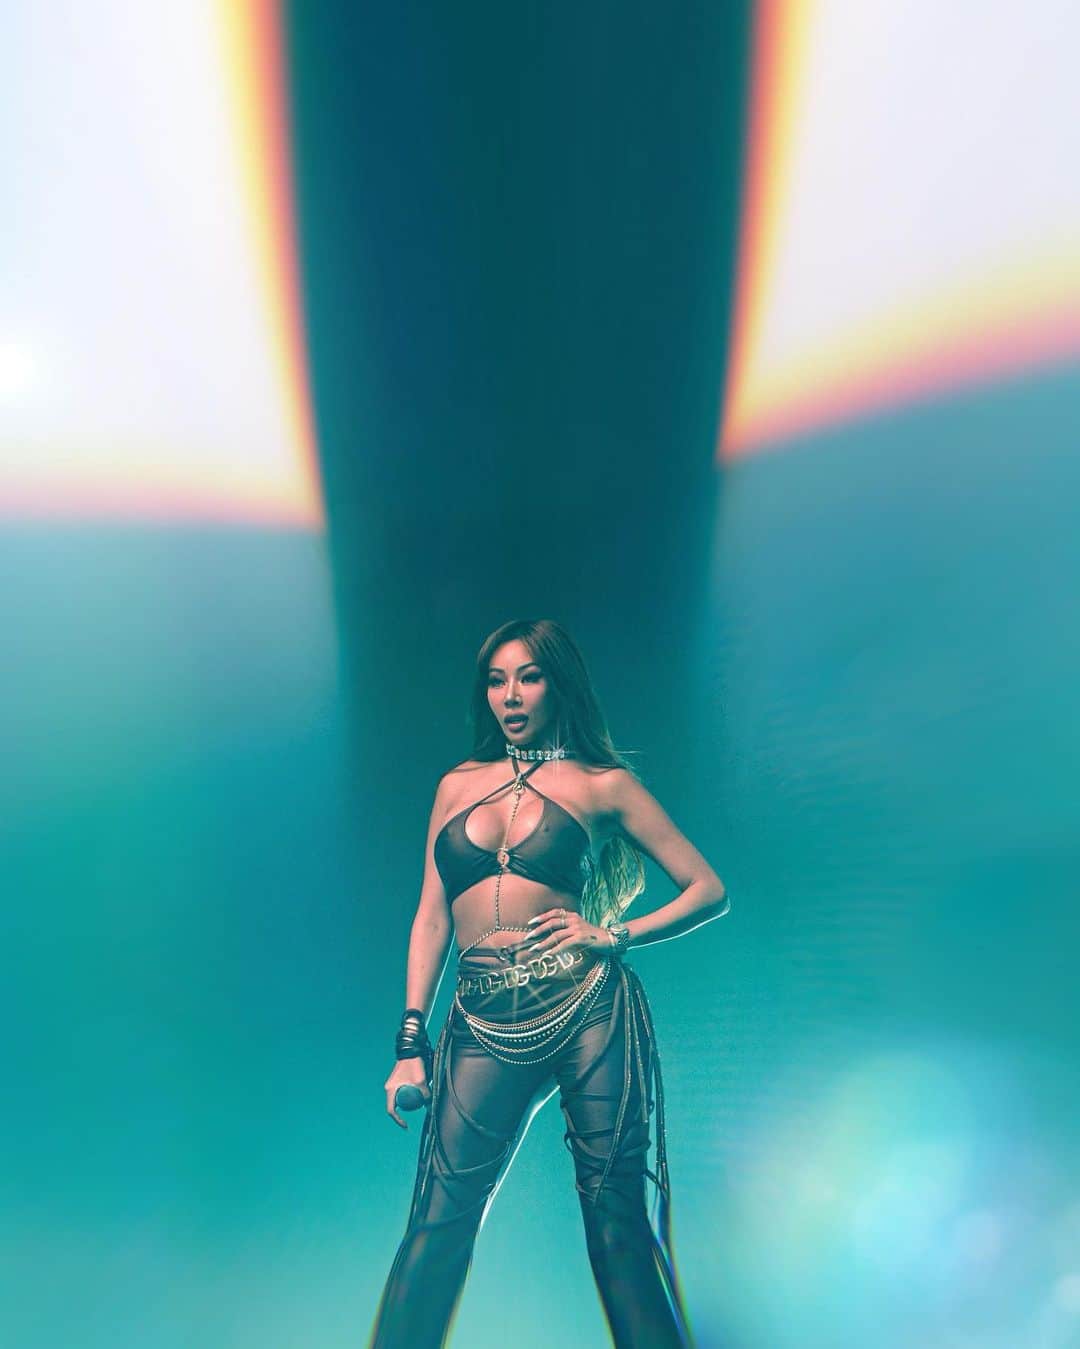 Jessiのインスタグラム：「VEGAS was too fckin lit 🔥🔥 Thank you guys for showing ya girl so much love 🙏🏻🙏🏻 Thank you for having me @webridgeexpo ❤️❤️ S/O to my bodyguard, manager and brother @holenciagaa on 4th slide!!!❤️ SWIPE!!!」